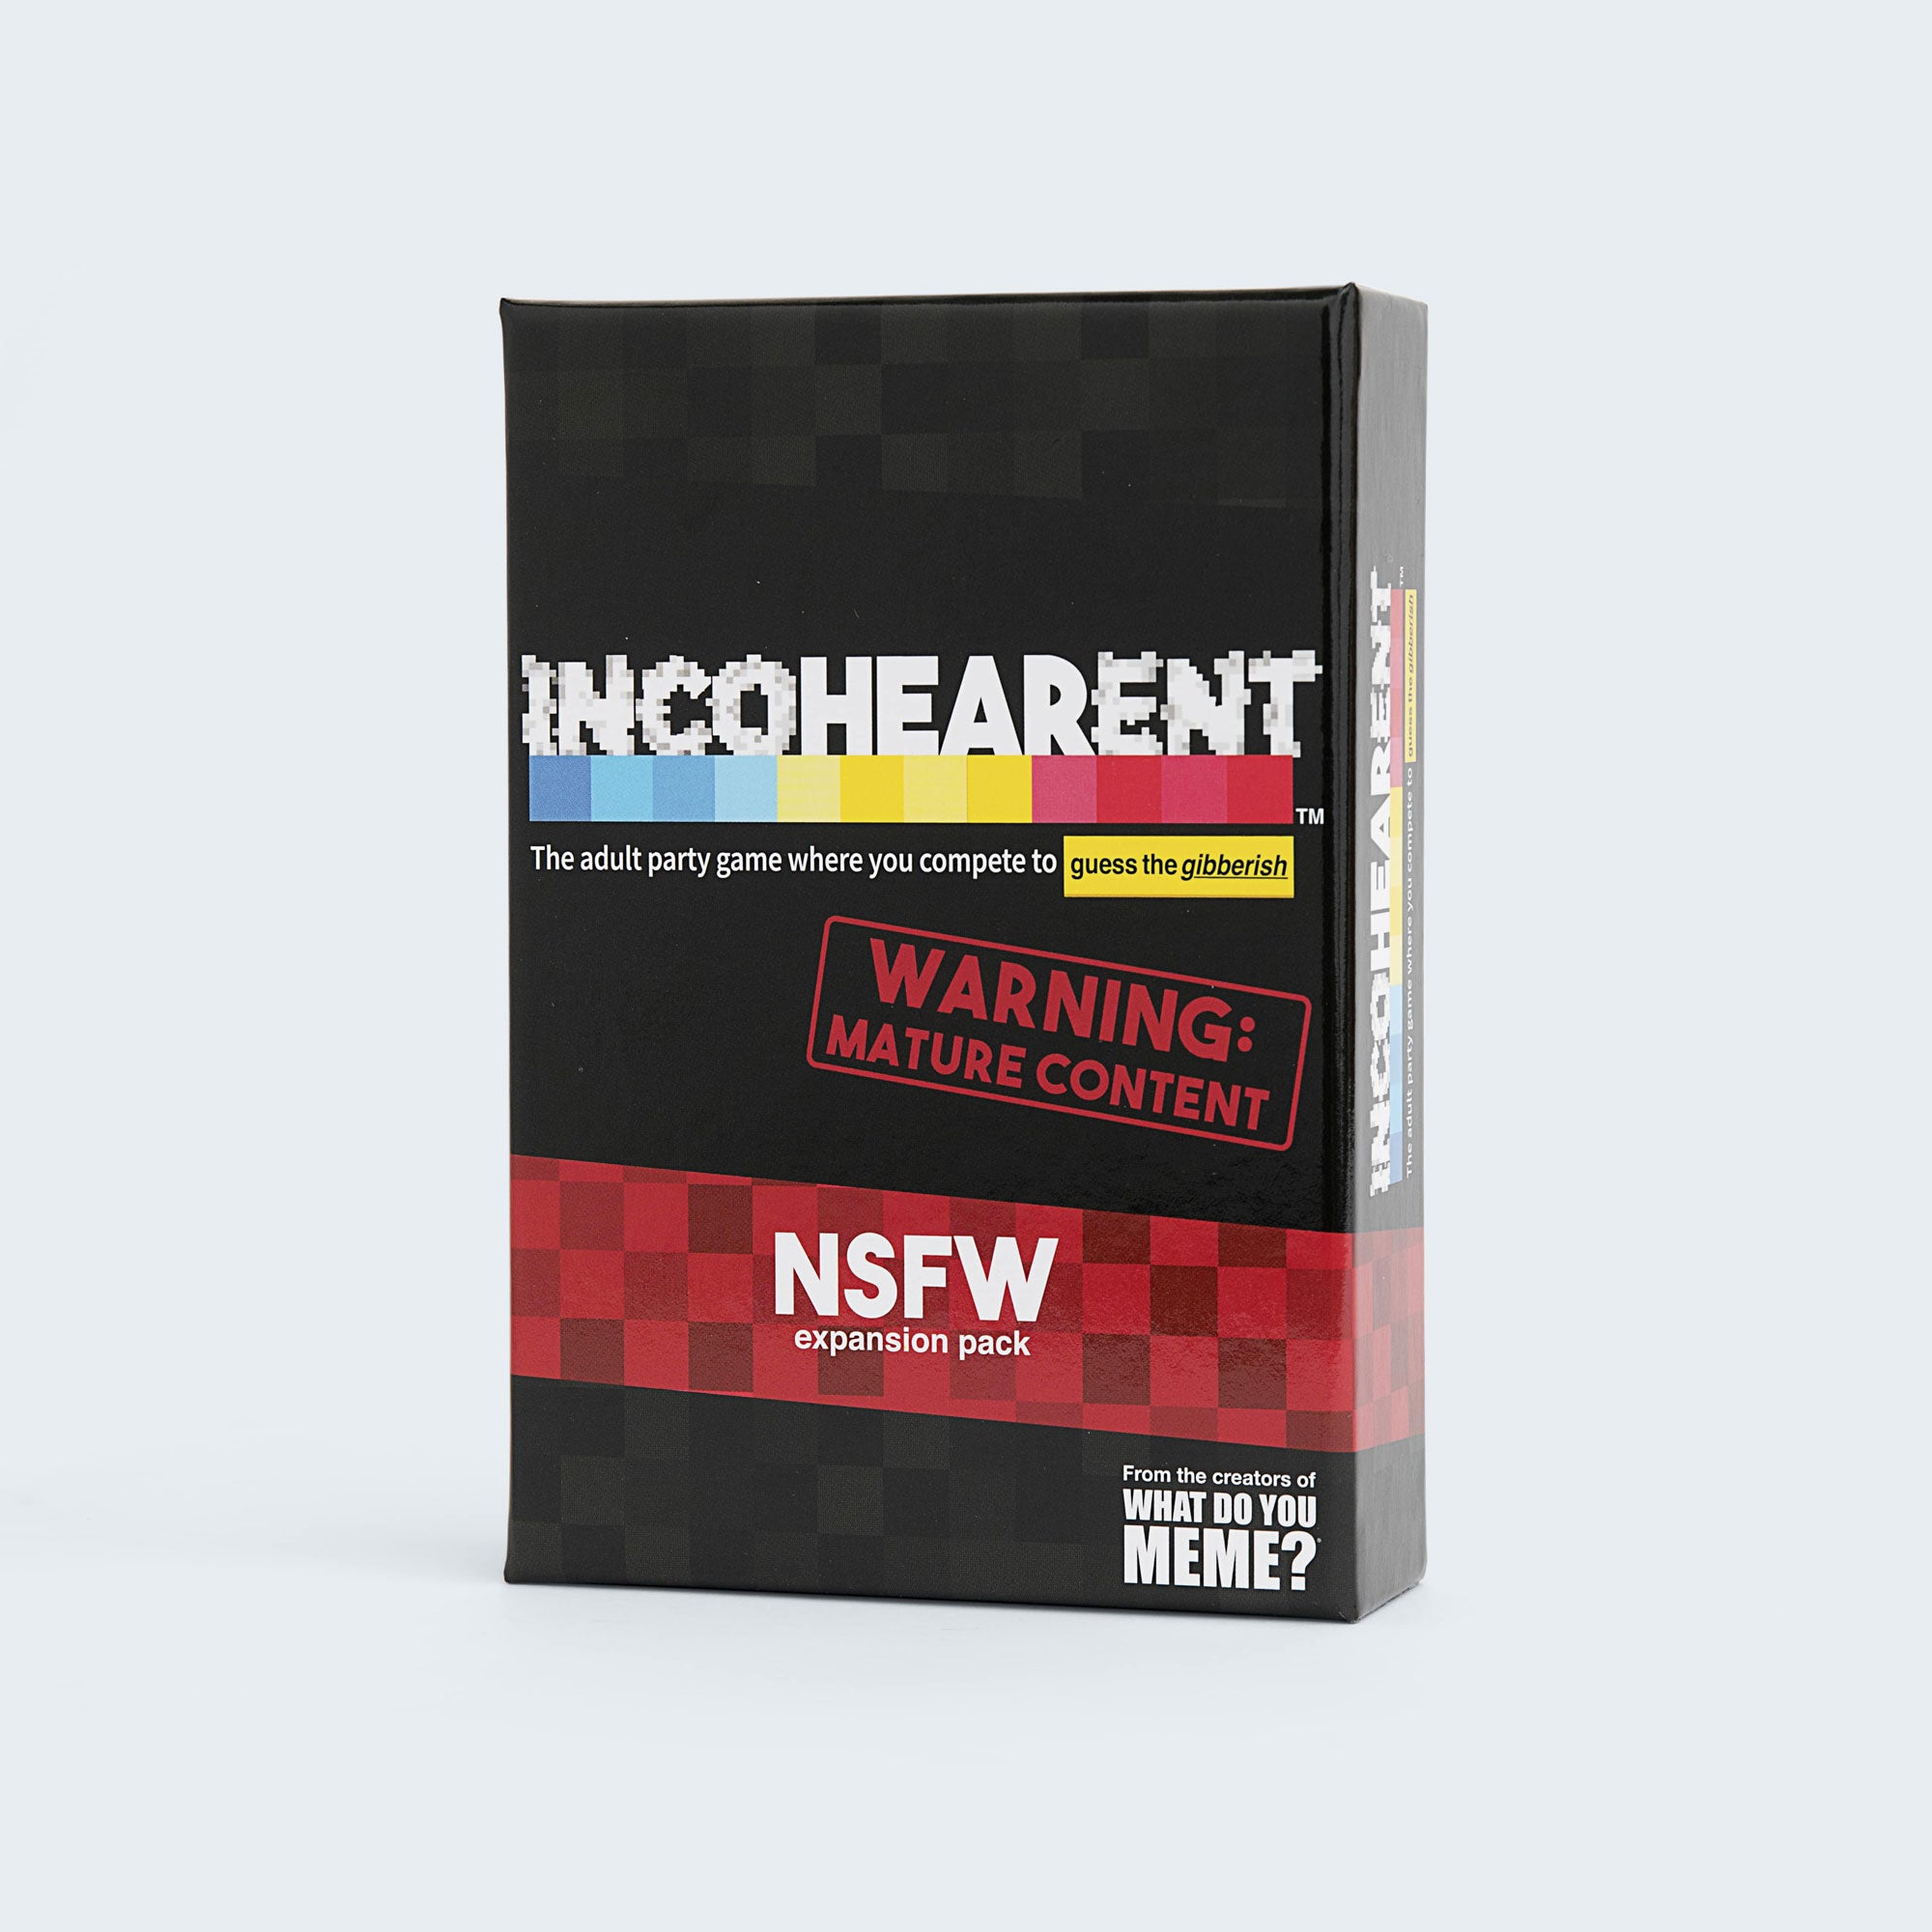 incohearent-nsfw-expansion-pack-game-box-and-game-play-02-what-do-you-meme-by-relatable